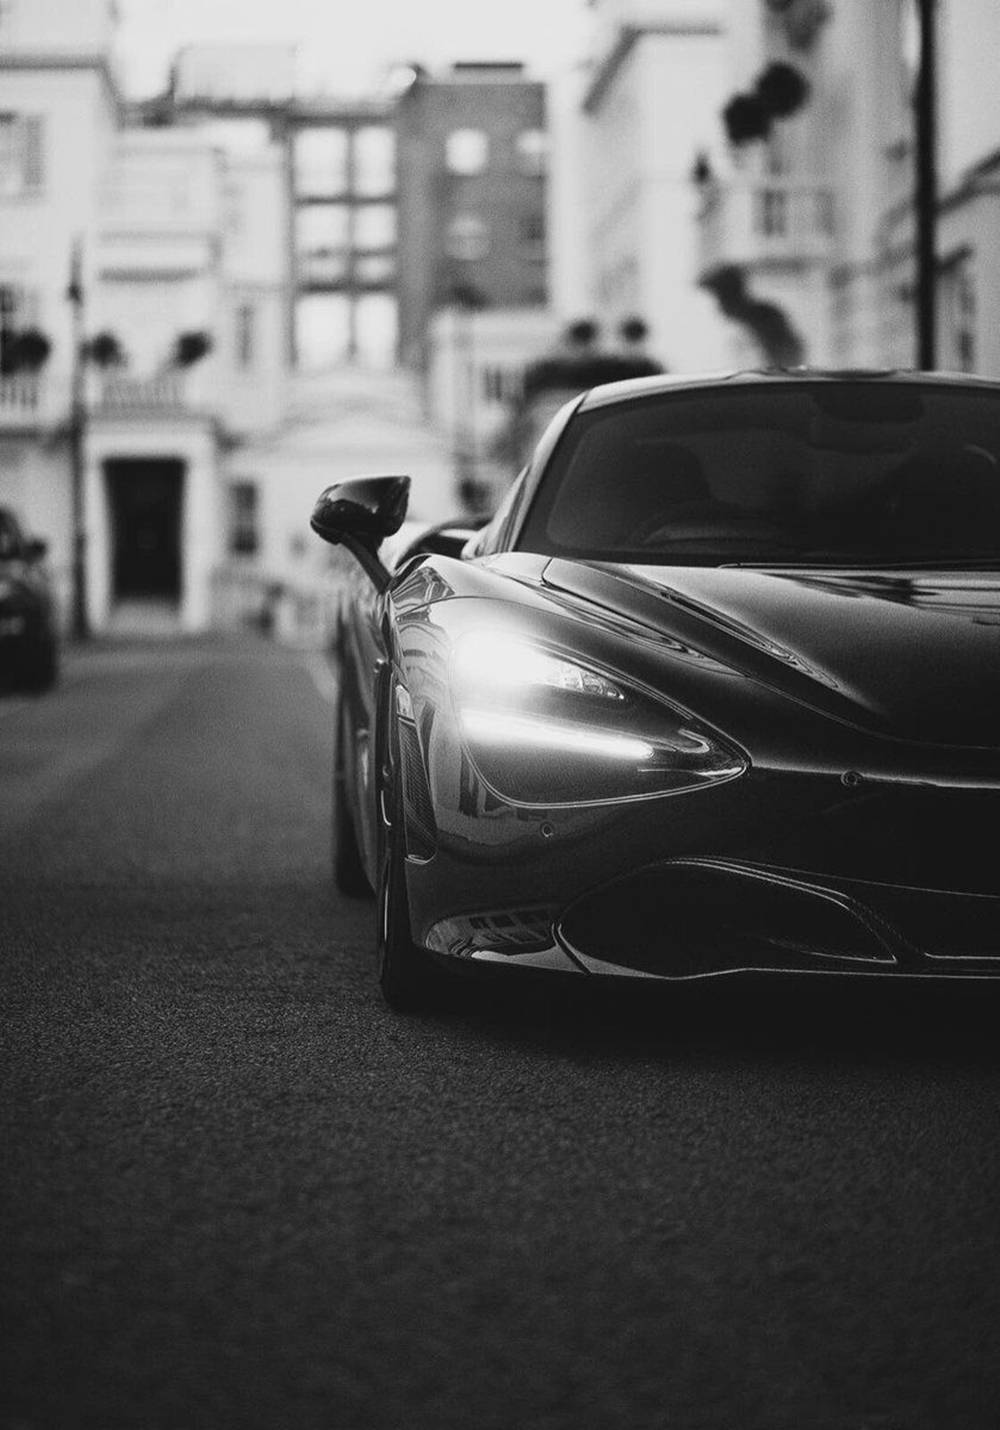 Mclaren 720s Phone Black And White On Road Wallpaper